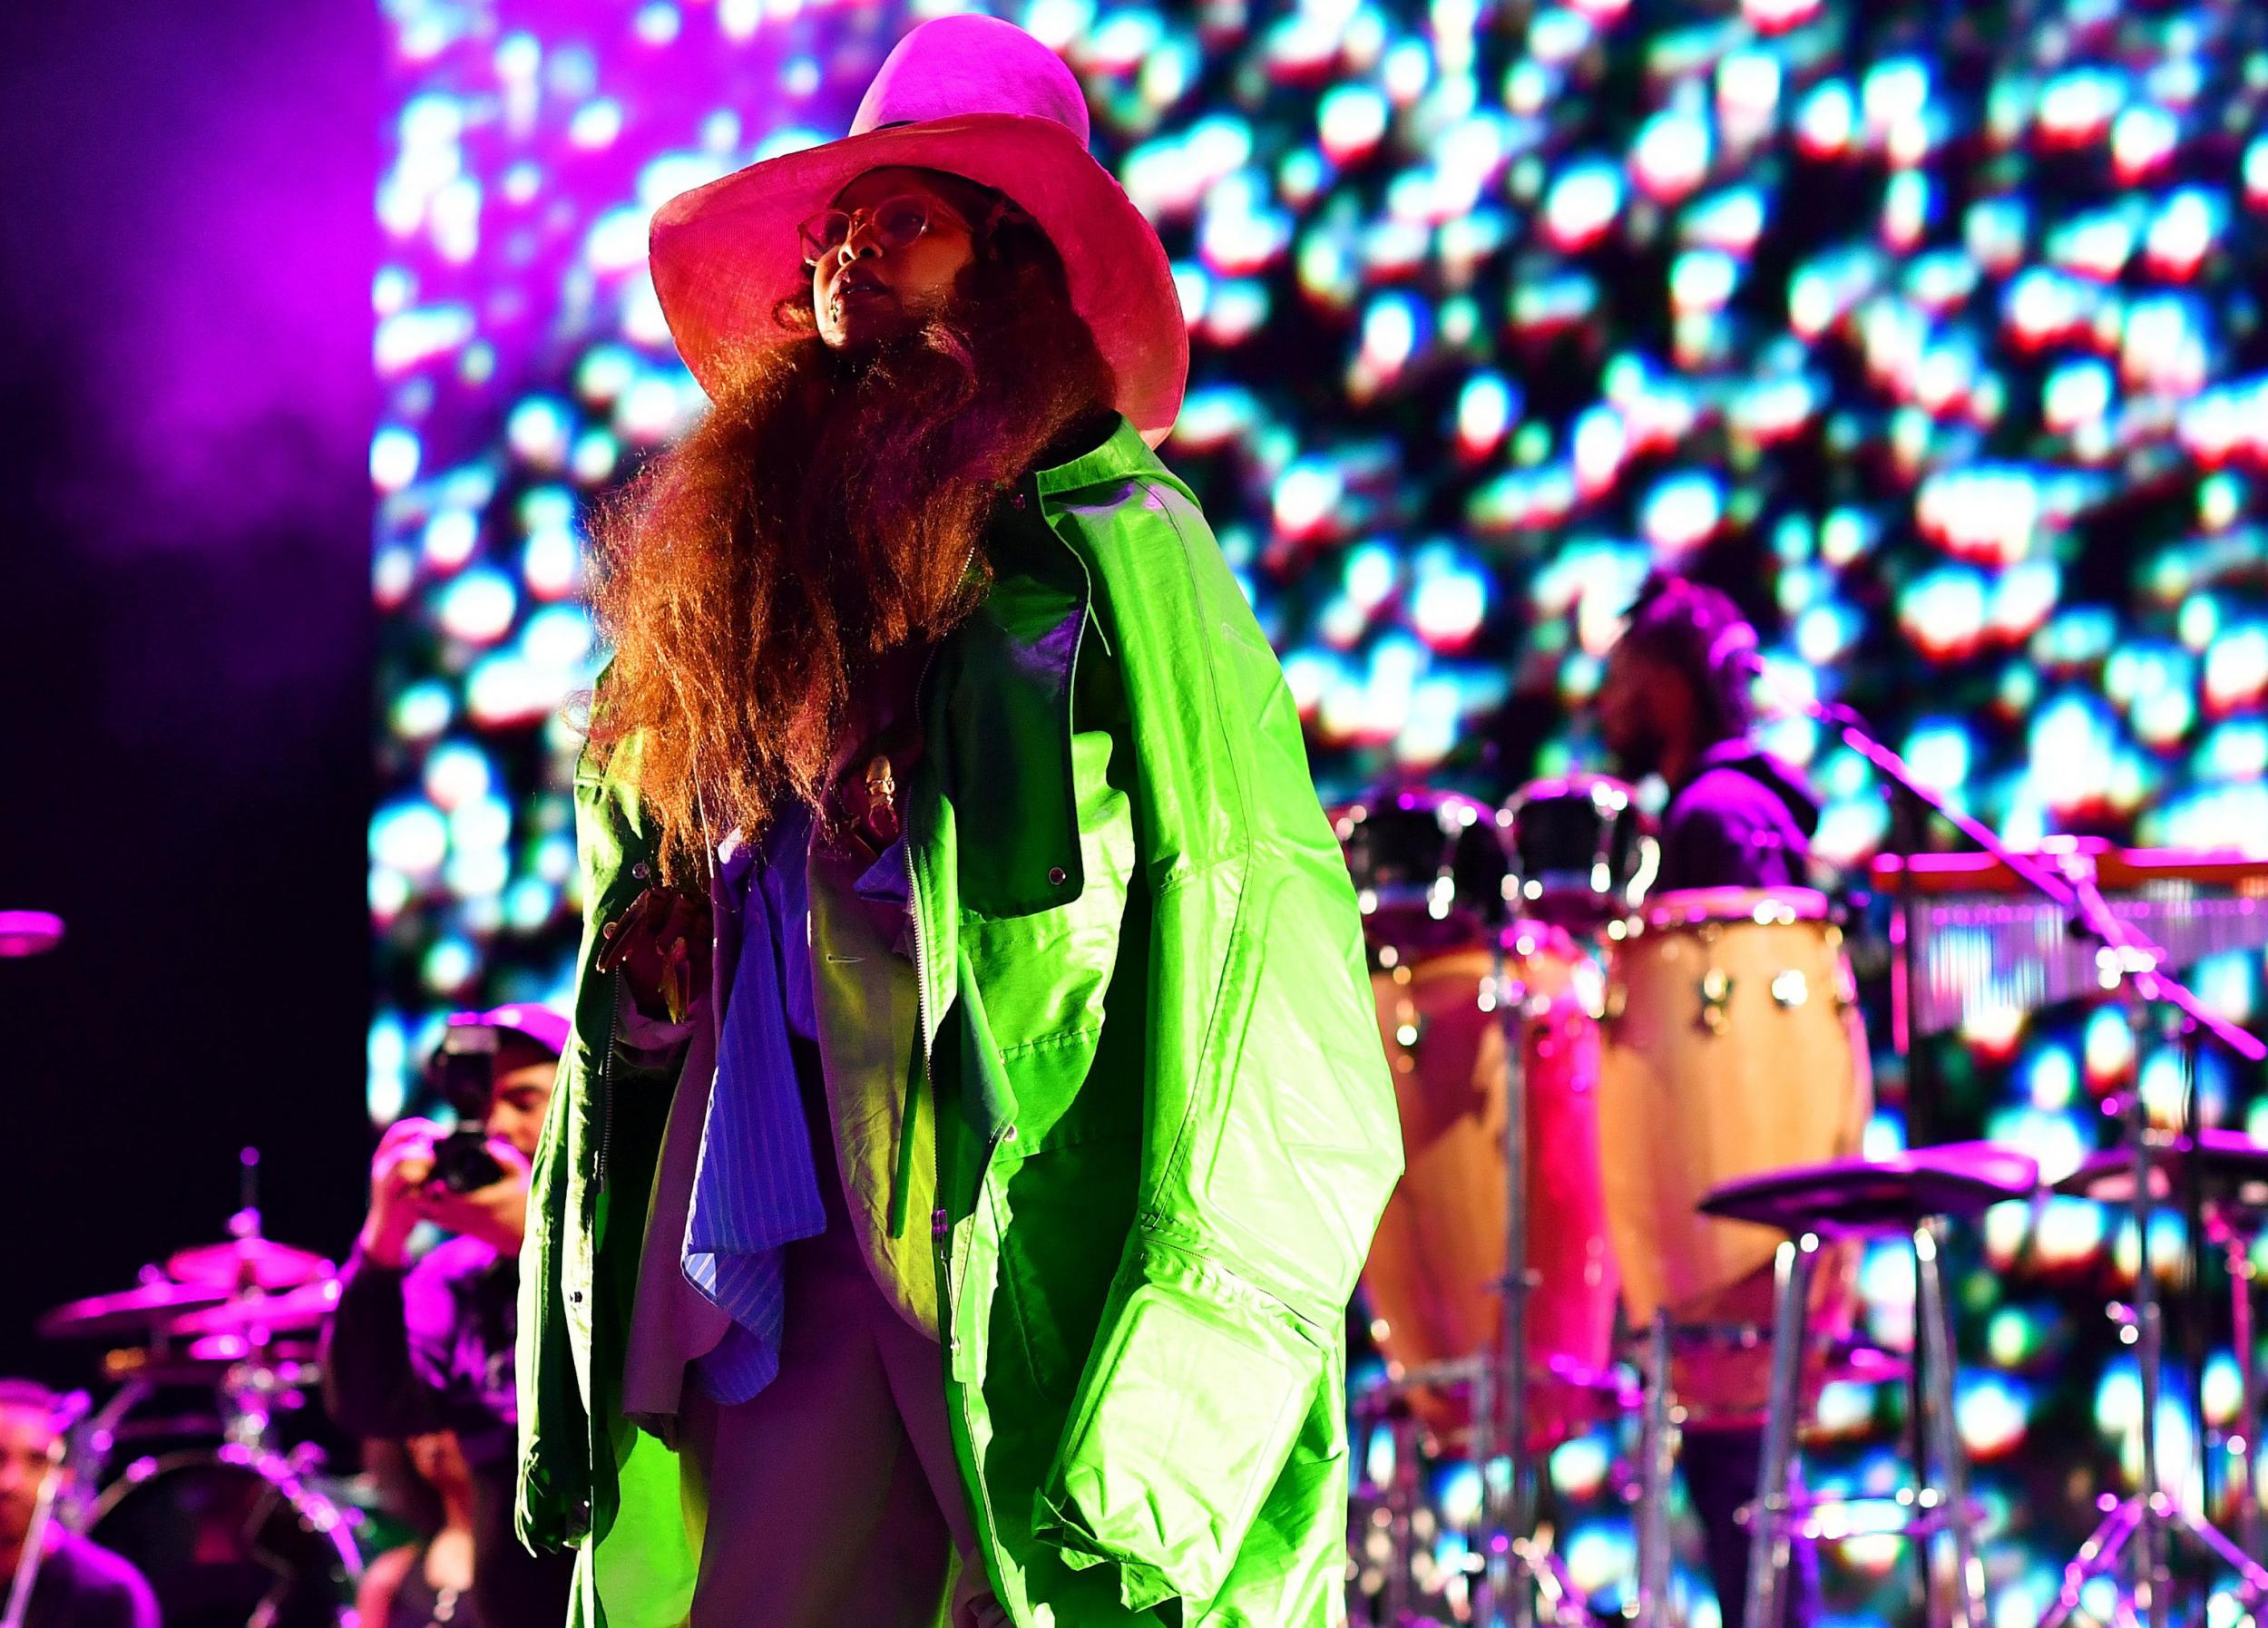 Erykah Badu performs on the Fader Stage during Field Day festival 2018 in London